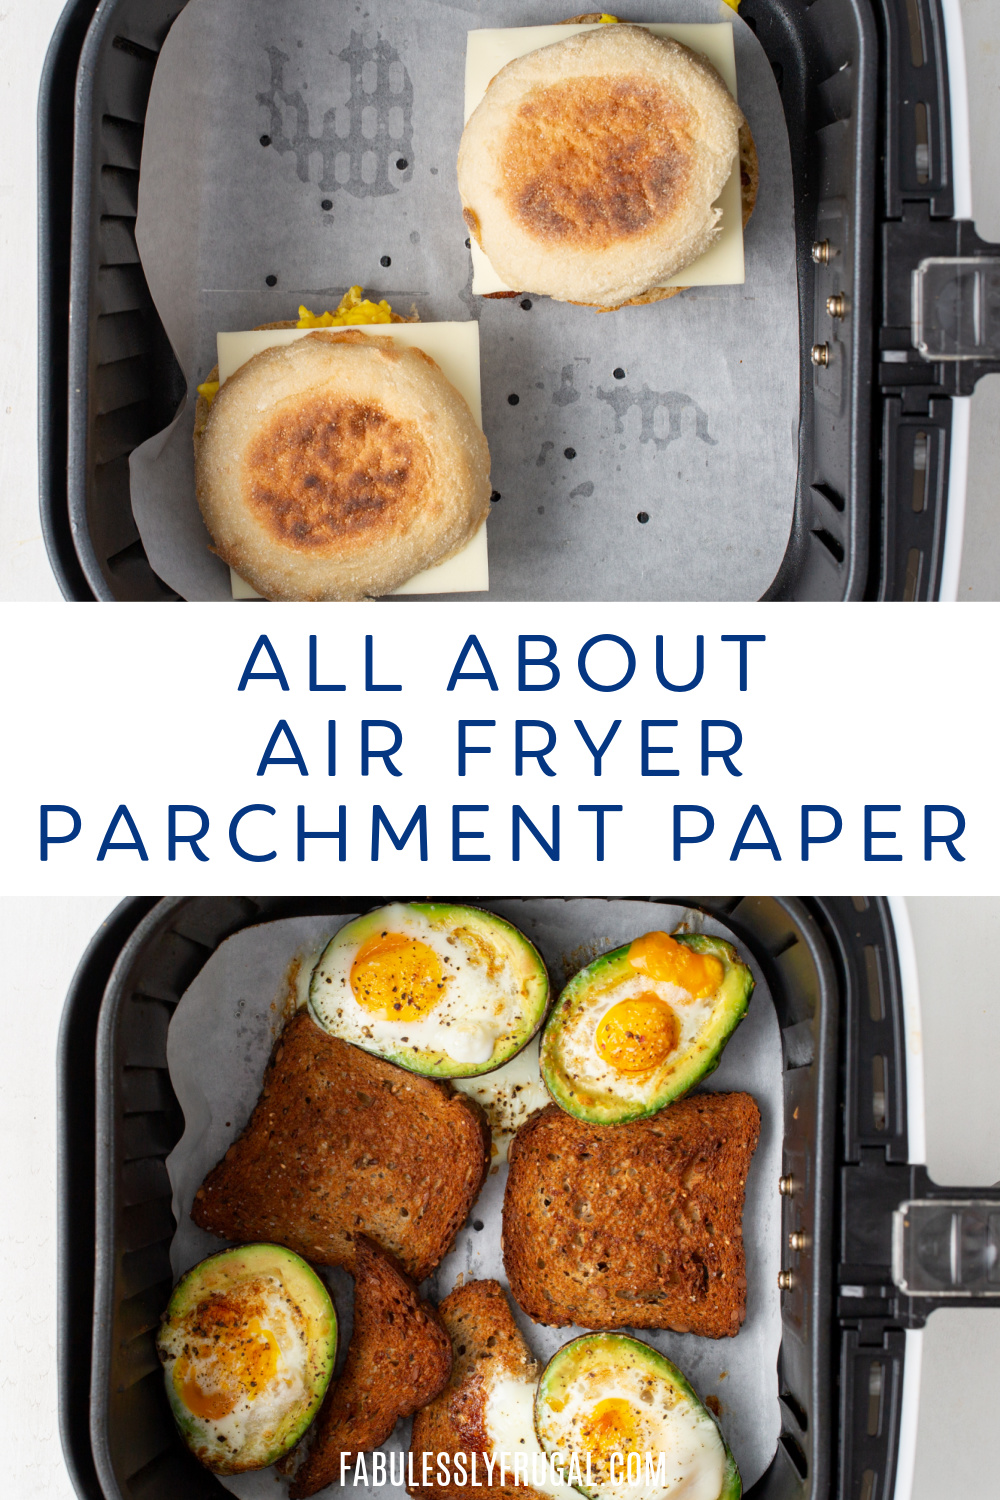 Can I Use Parchment Paper in Air Fryer